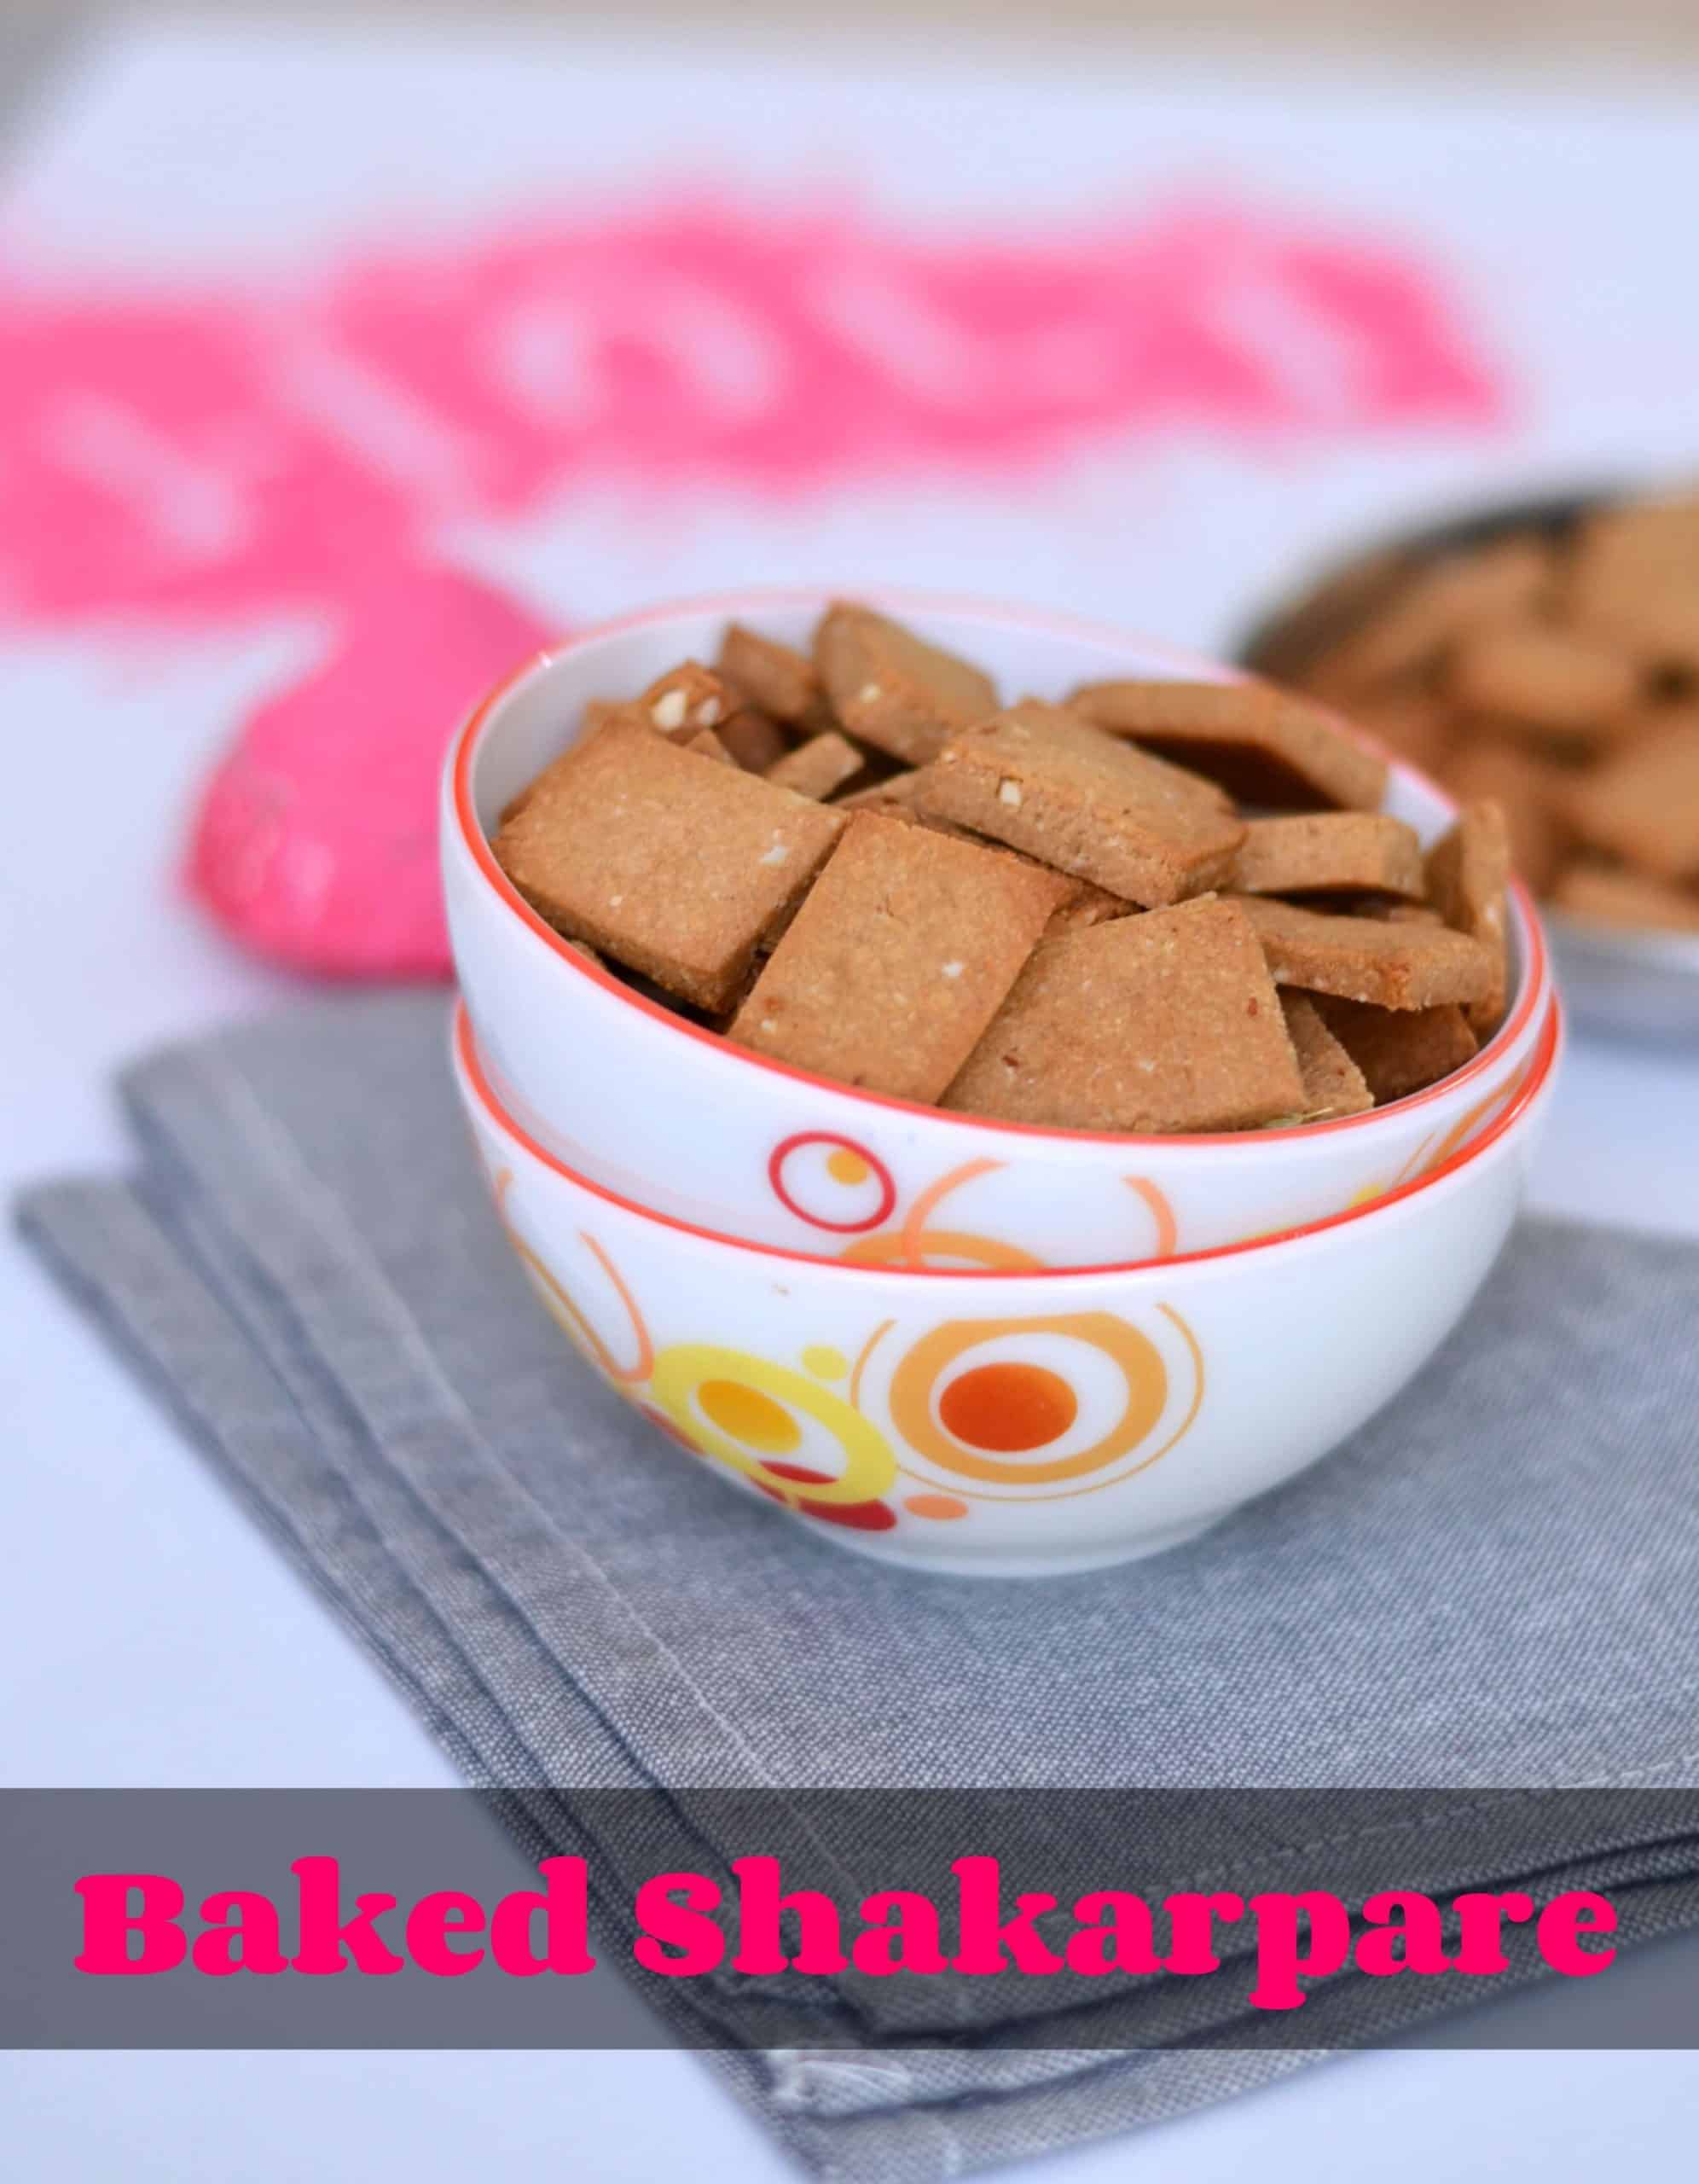 Baked Shakarpara is a sweet wholewheat biscuit which is prepared specially on Holi festival in India. Traditionally sweet shakarpara recipe uses refined flour, and they are deep fried. As the name says, baked shakarpara is the healthy version using whole wheat flour and no deep frying required.